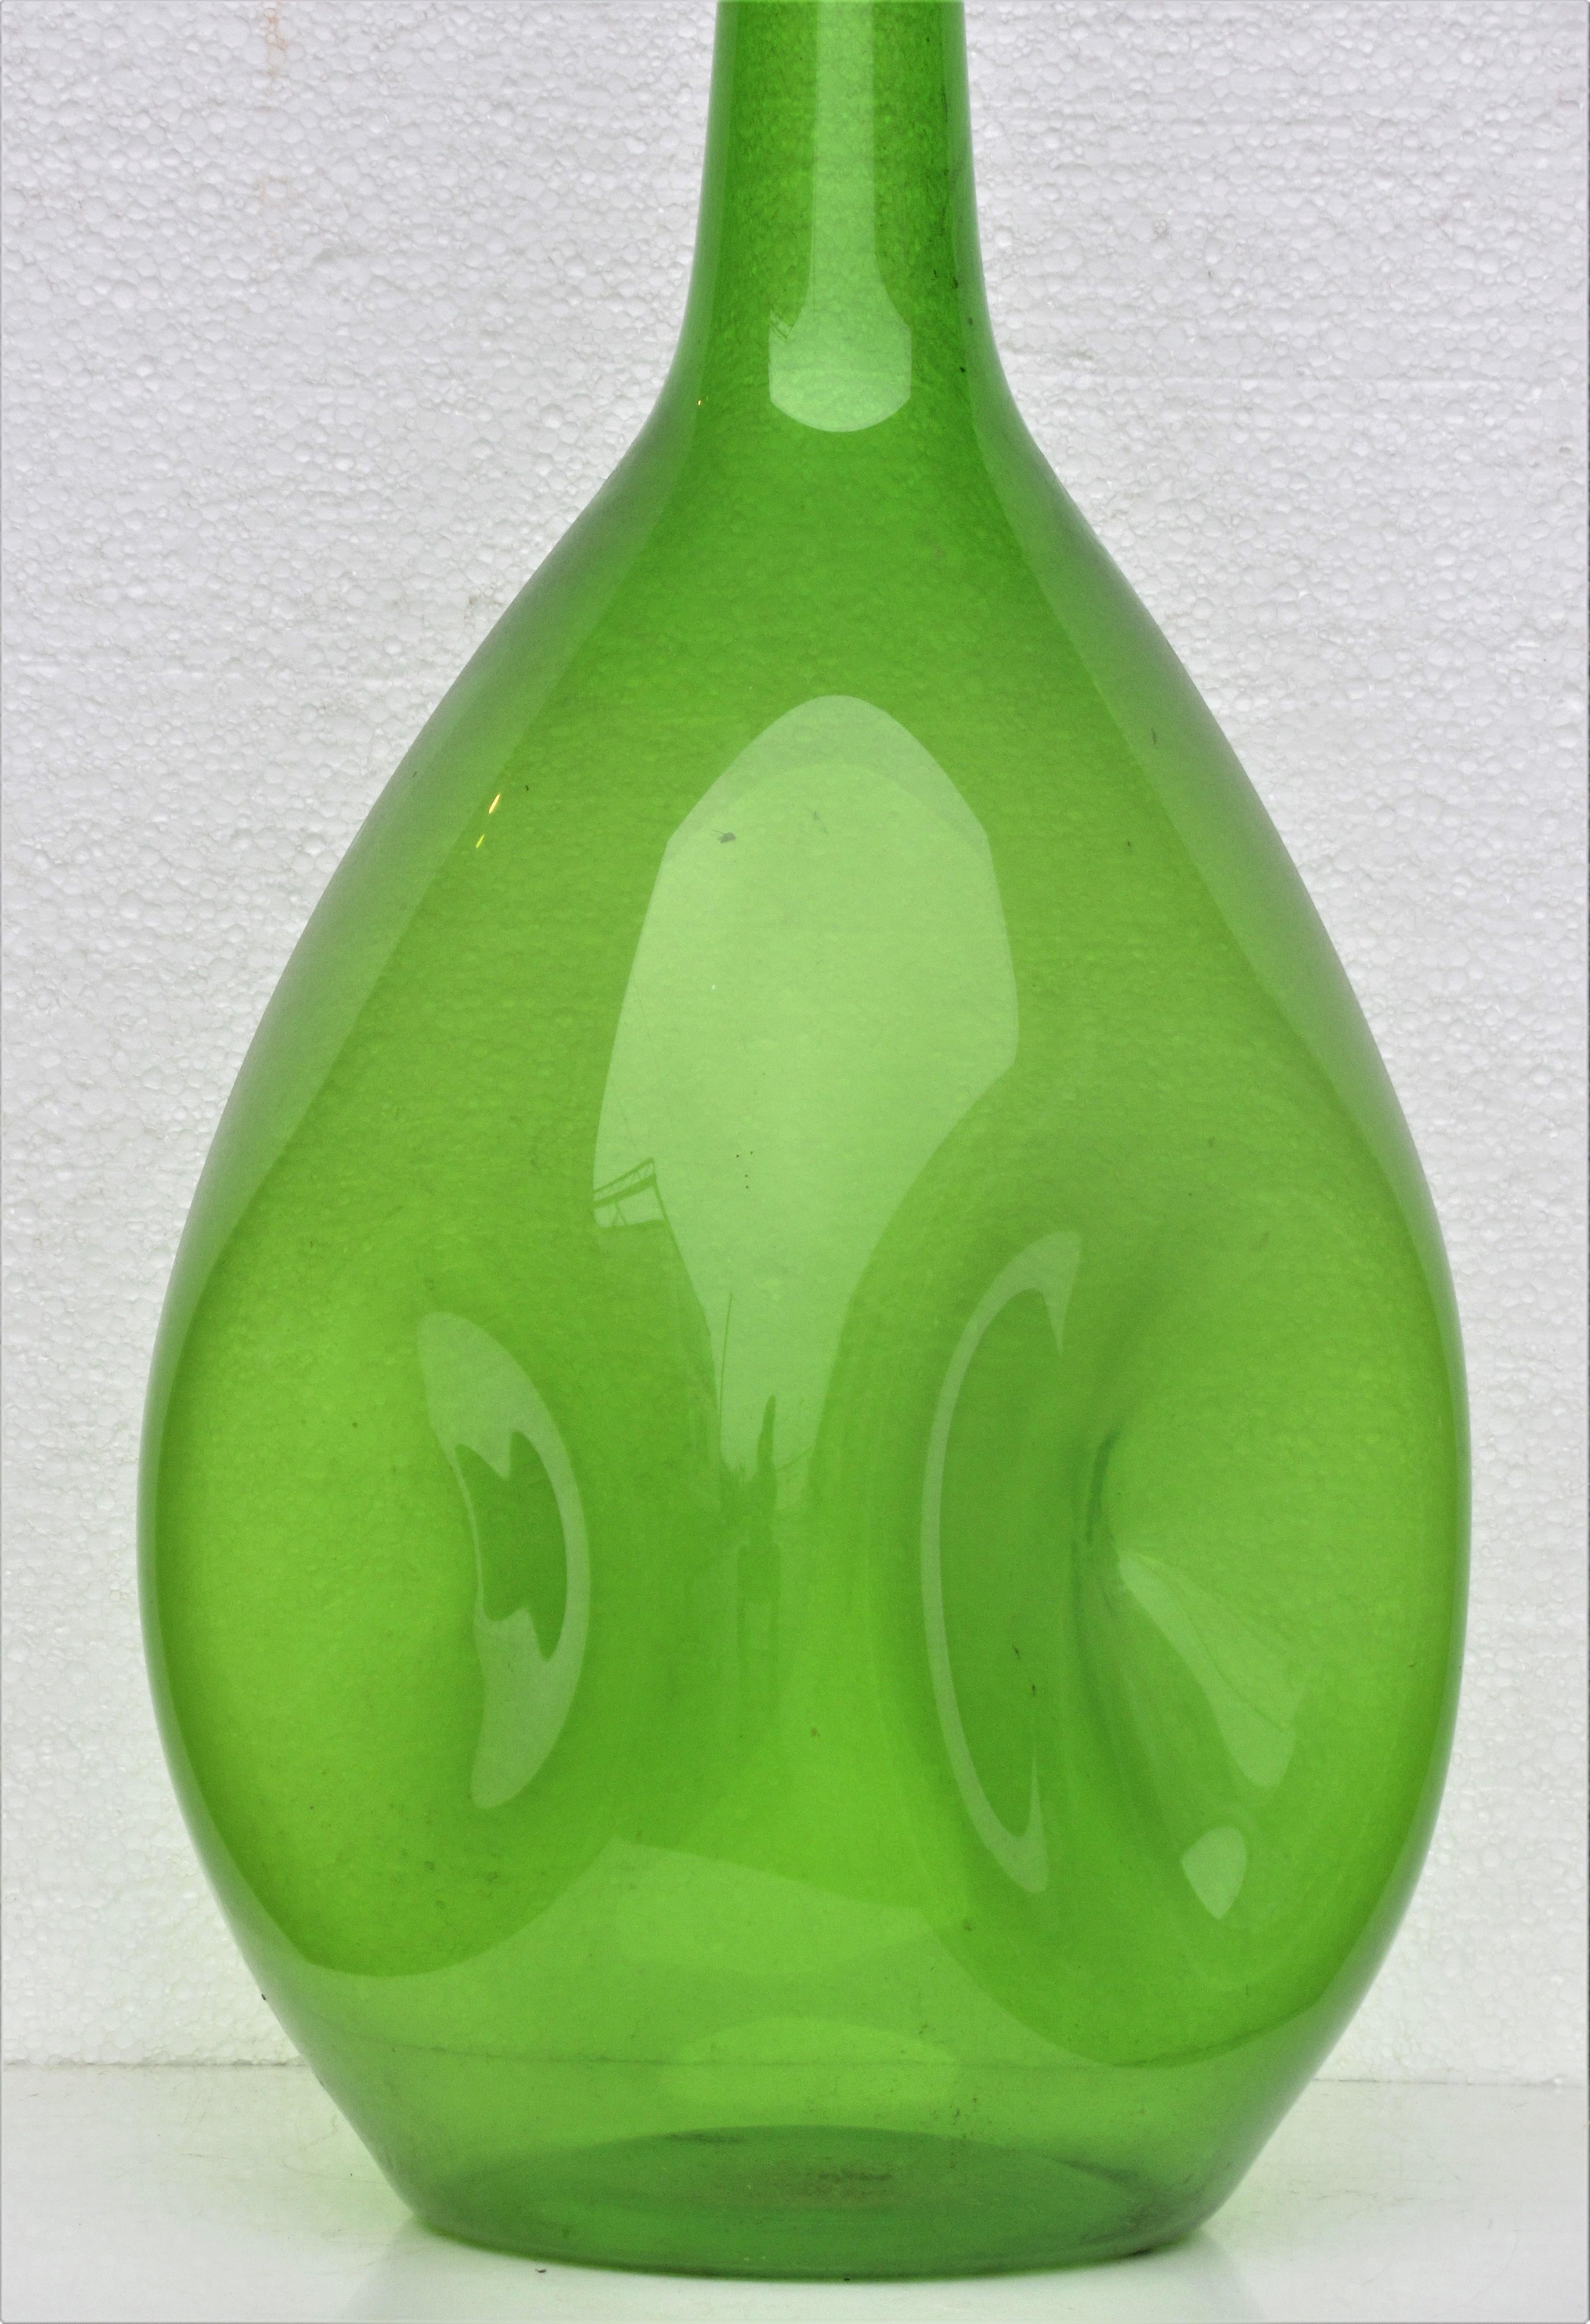 Zeller Glass Company blown glass large dimpled vessel with beautiful luminous green color and great sculptural form, circa 1960.